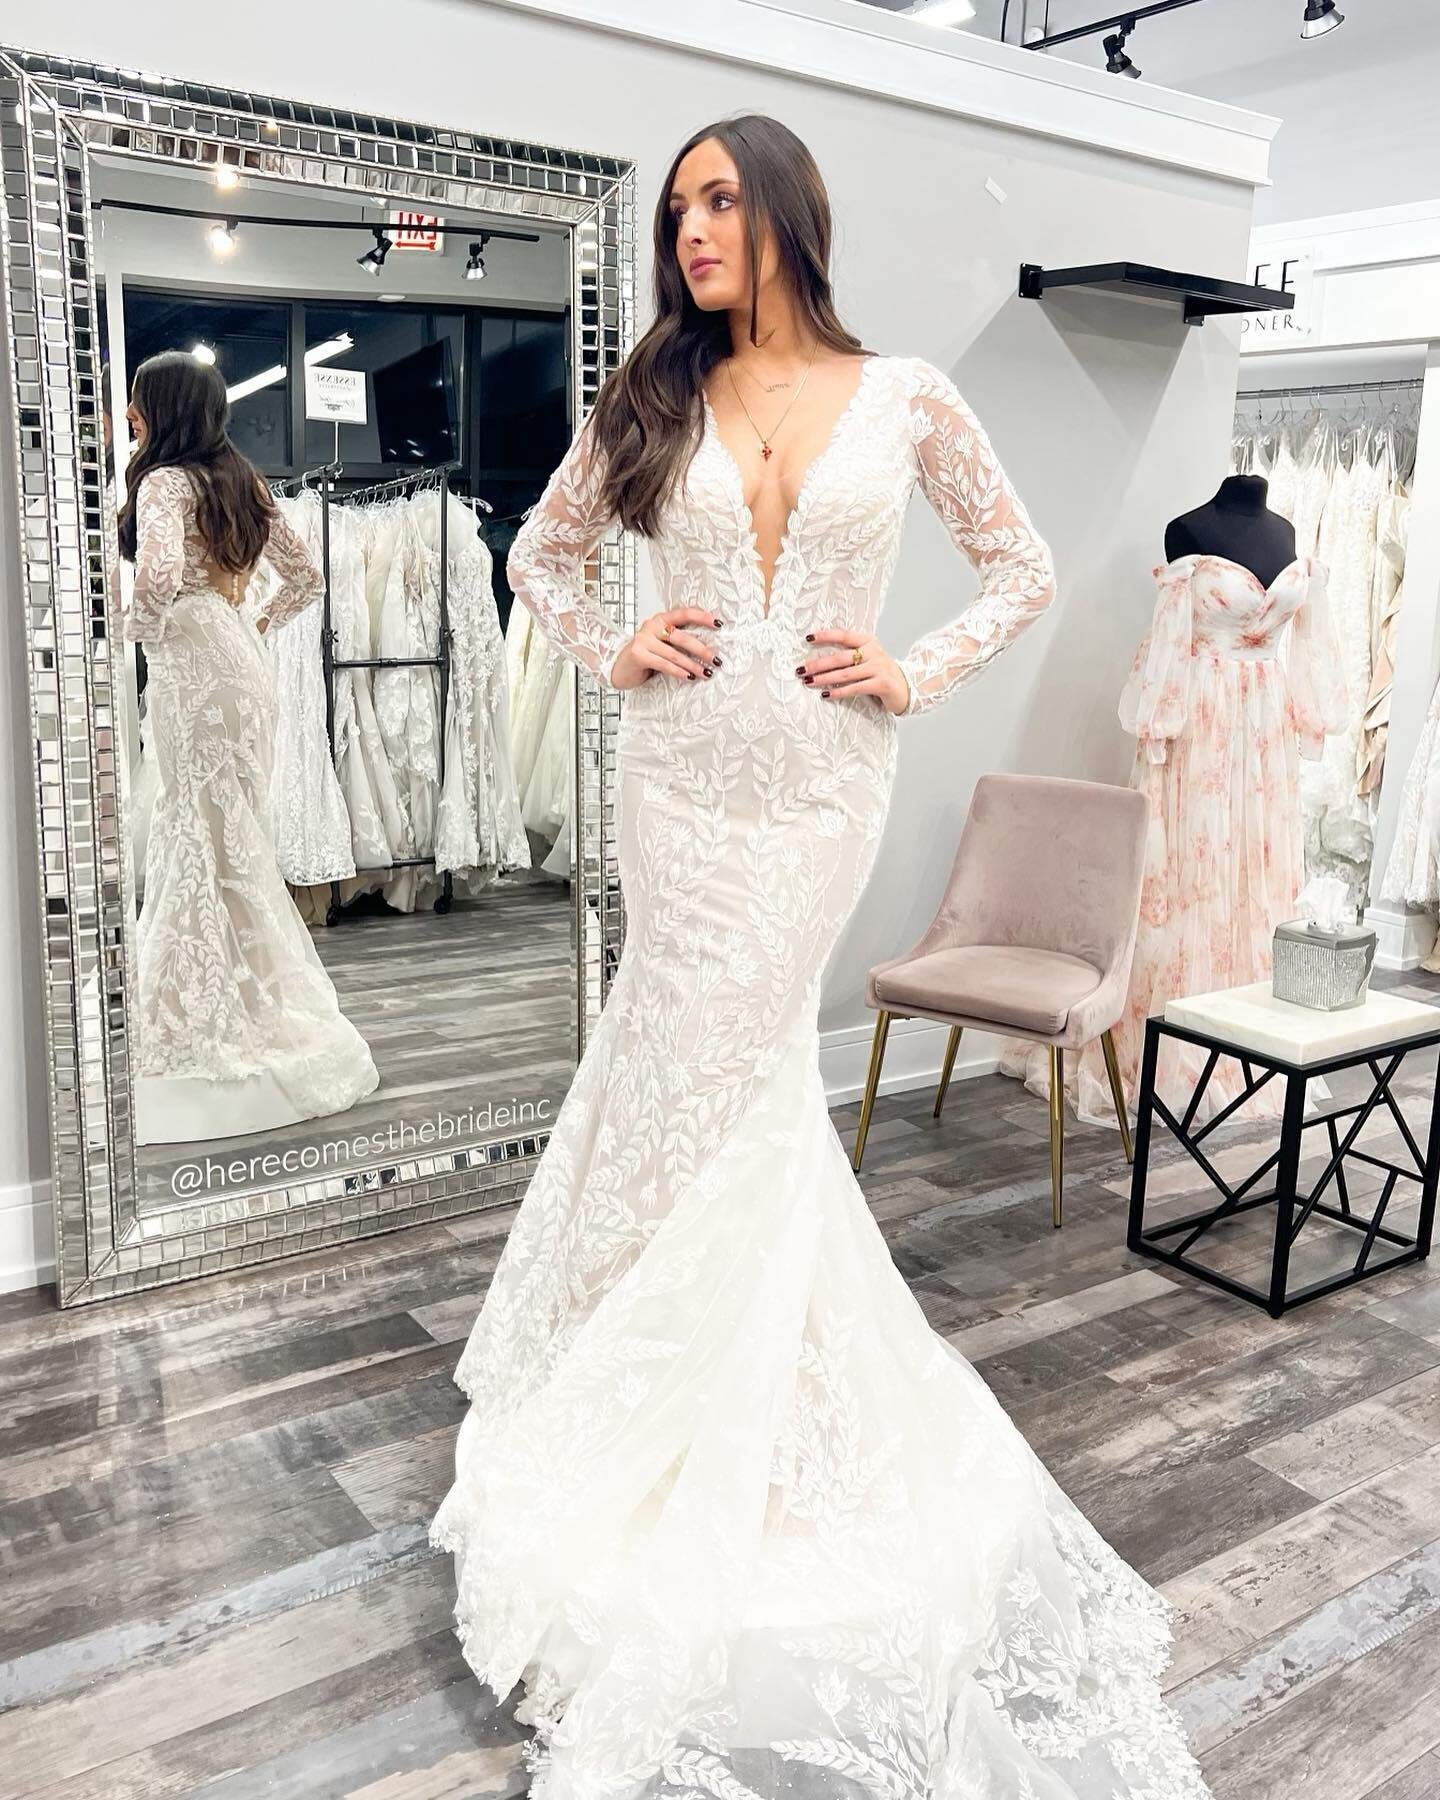 ✨We&rsquo;re in love with our new @martinalianabridal gown and can&rsquo;t get enough of all the details🥰 We have limited availability for the rest of the holiday weekend, give us a call to set up your appointment!!🤍
.
.
.
Martina Liana 1525✨
.
.
.